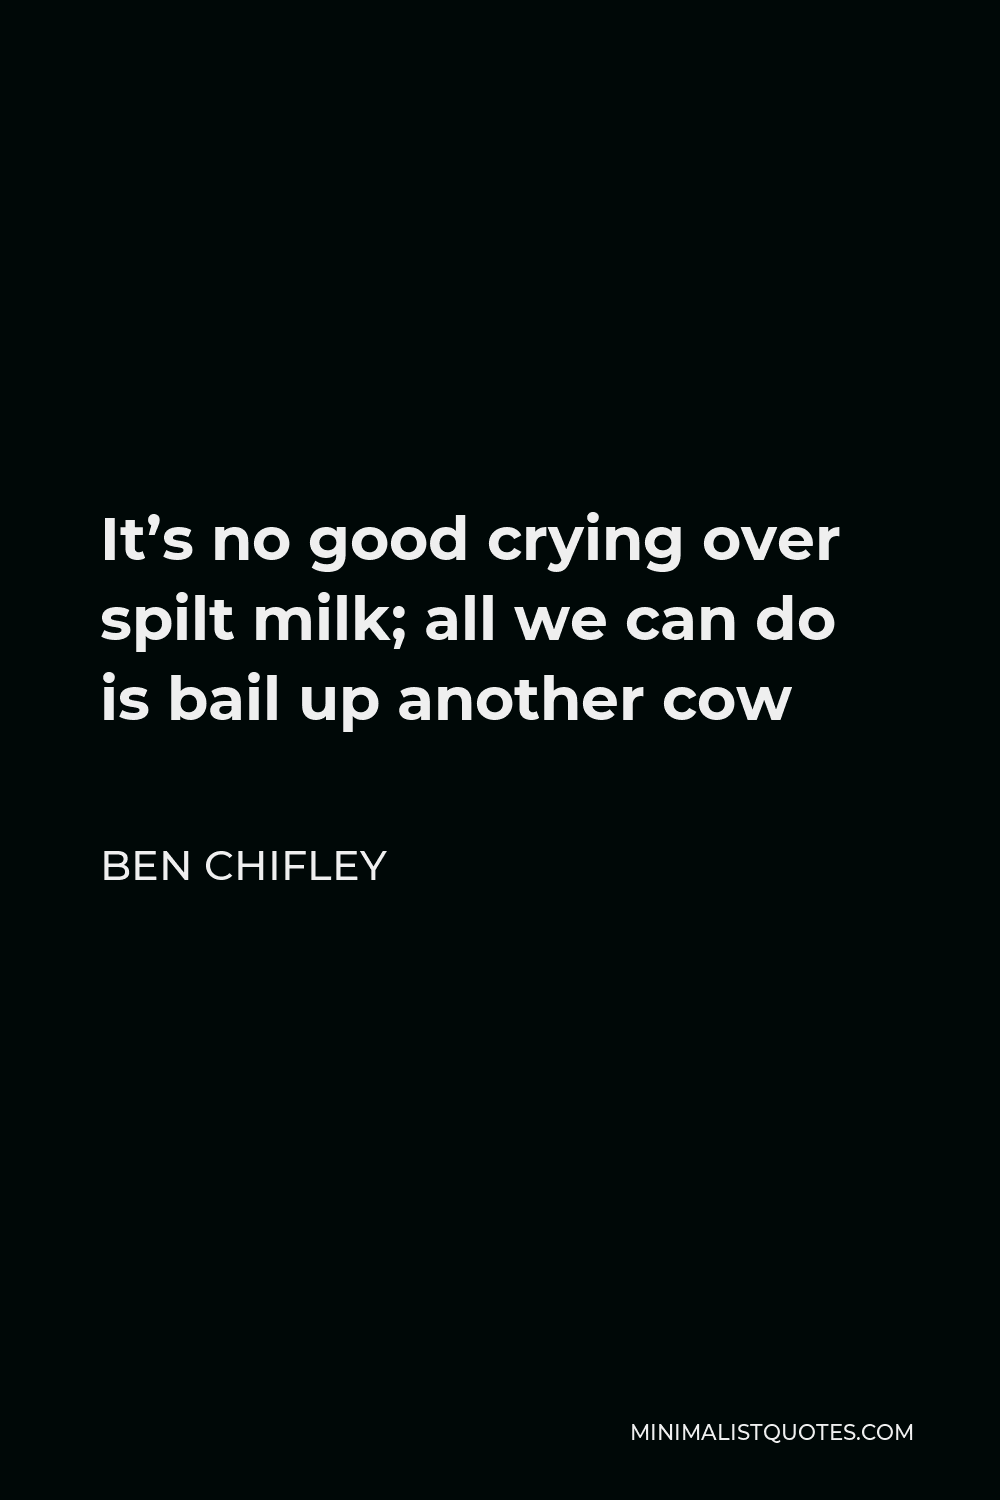 Ben Chifley Quote - It’s no good crying over spilt milk; all we can do is bail up another cow